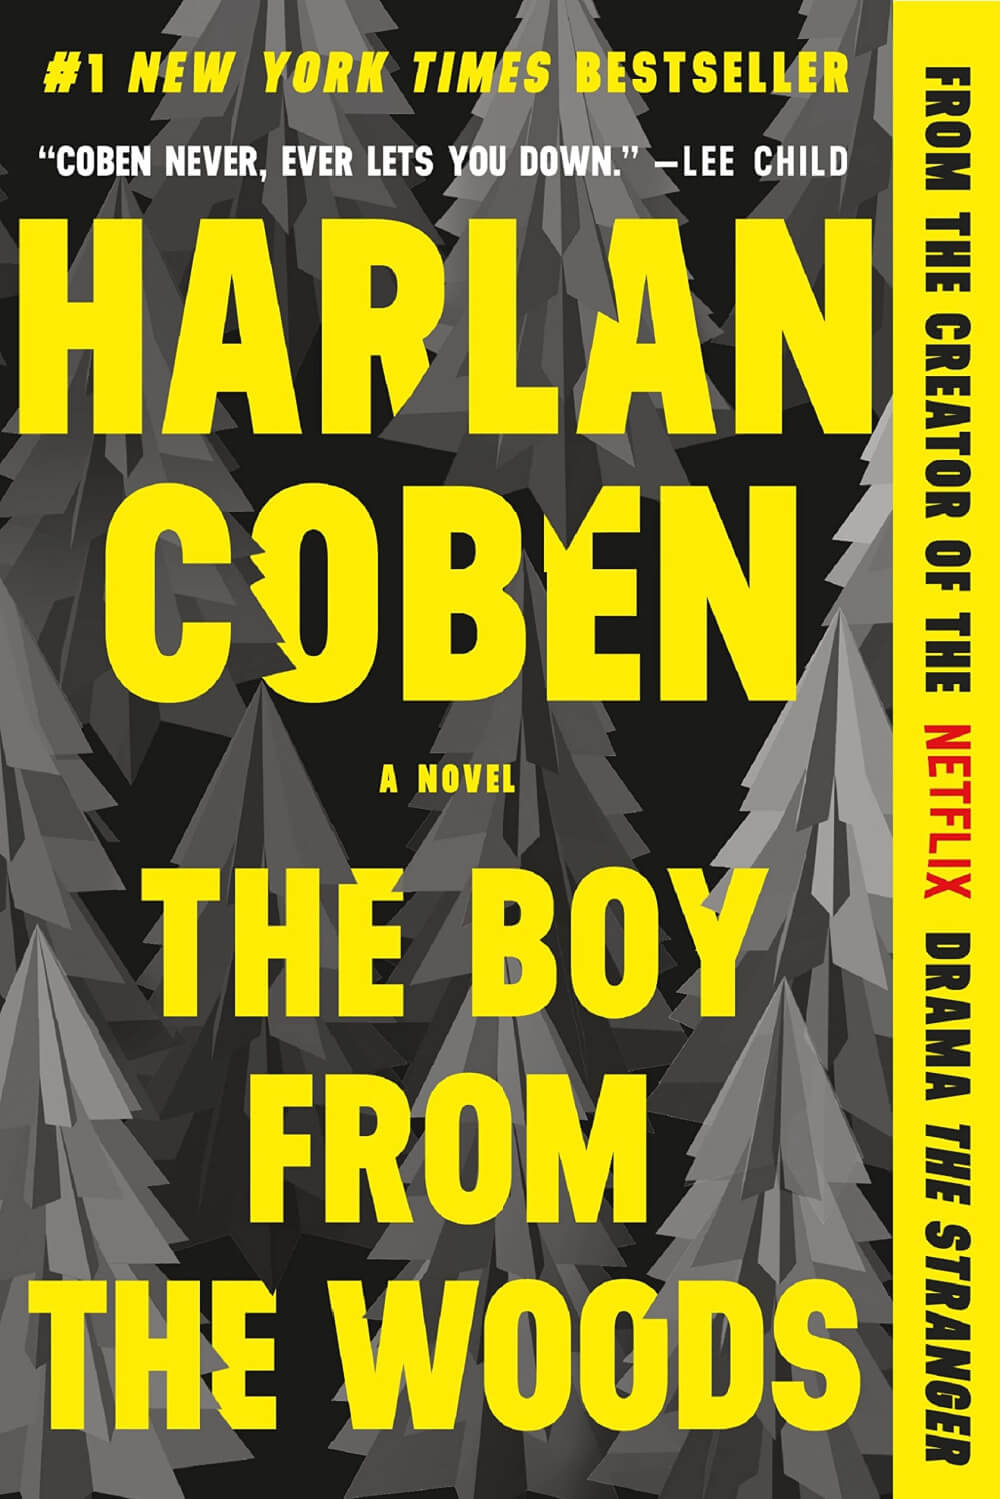 In Sunday Snippets 9.10.23, Harlan Coben's book The Boy From The Woods